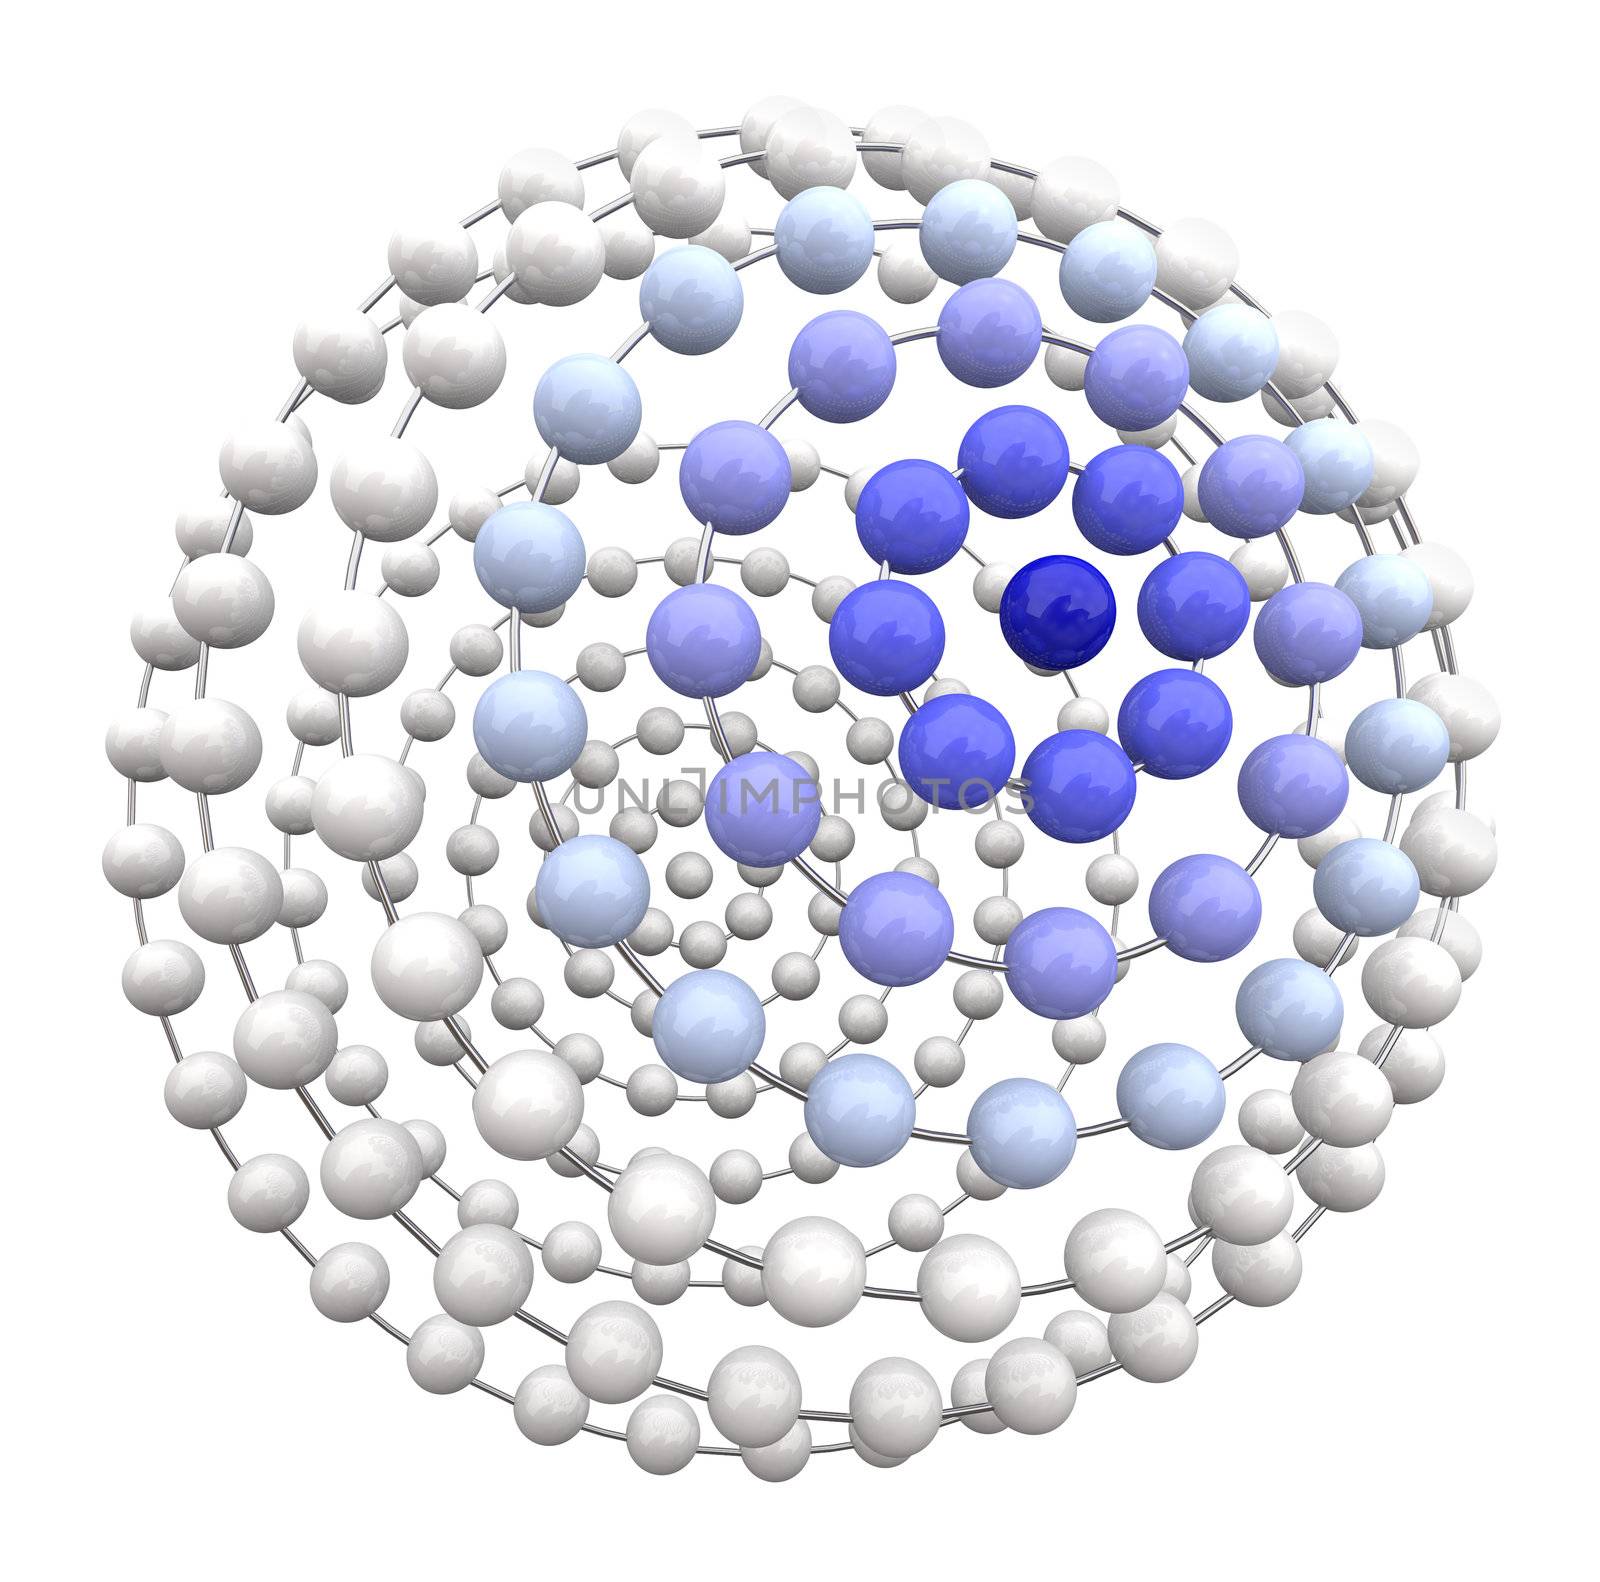 A white sphere with concentration of blue connected balls